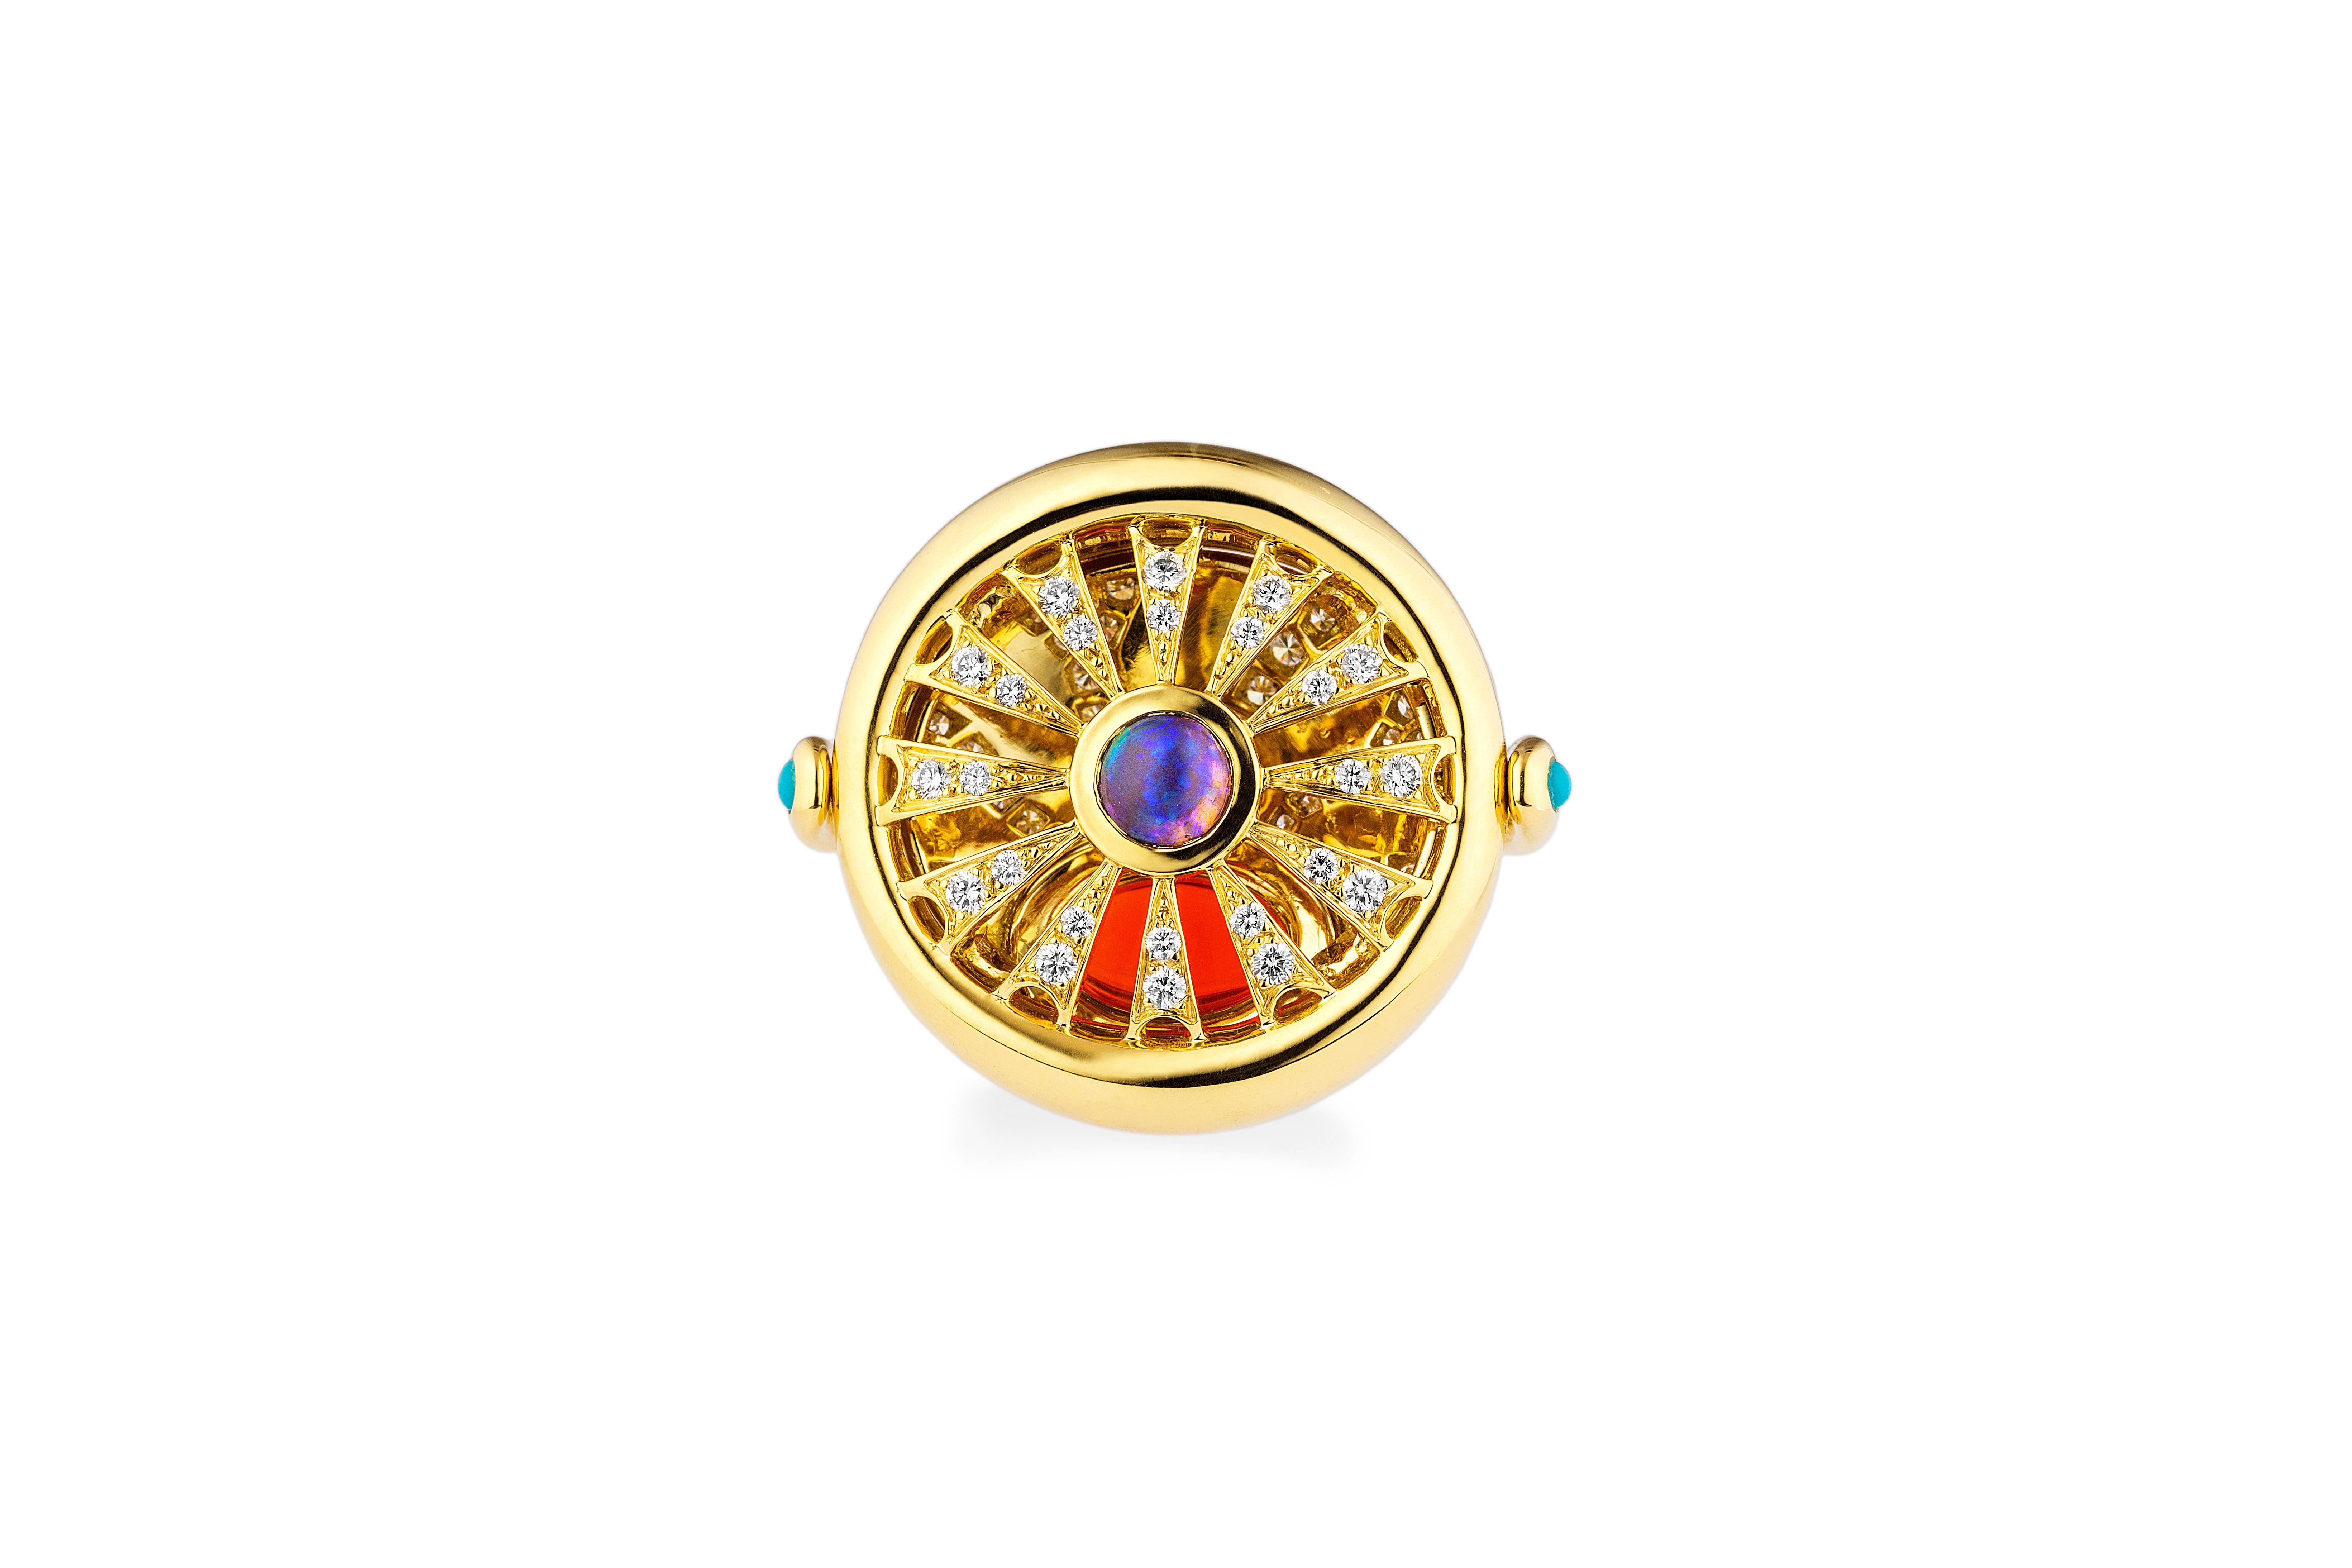 The Four Elements Fire Ring illustrates the creative nature that ignites our passions through its bold imagery. A fire opal center emblazoned in the rising sun is surrounded by magnificent rays playfully sparkling with diamonds against an enamel